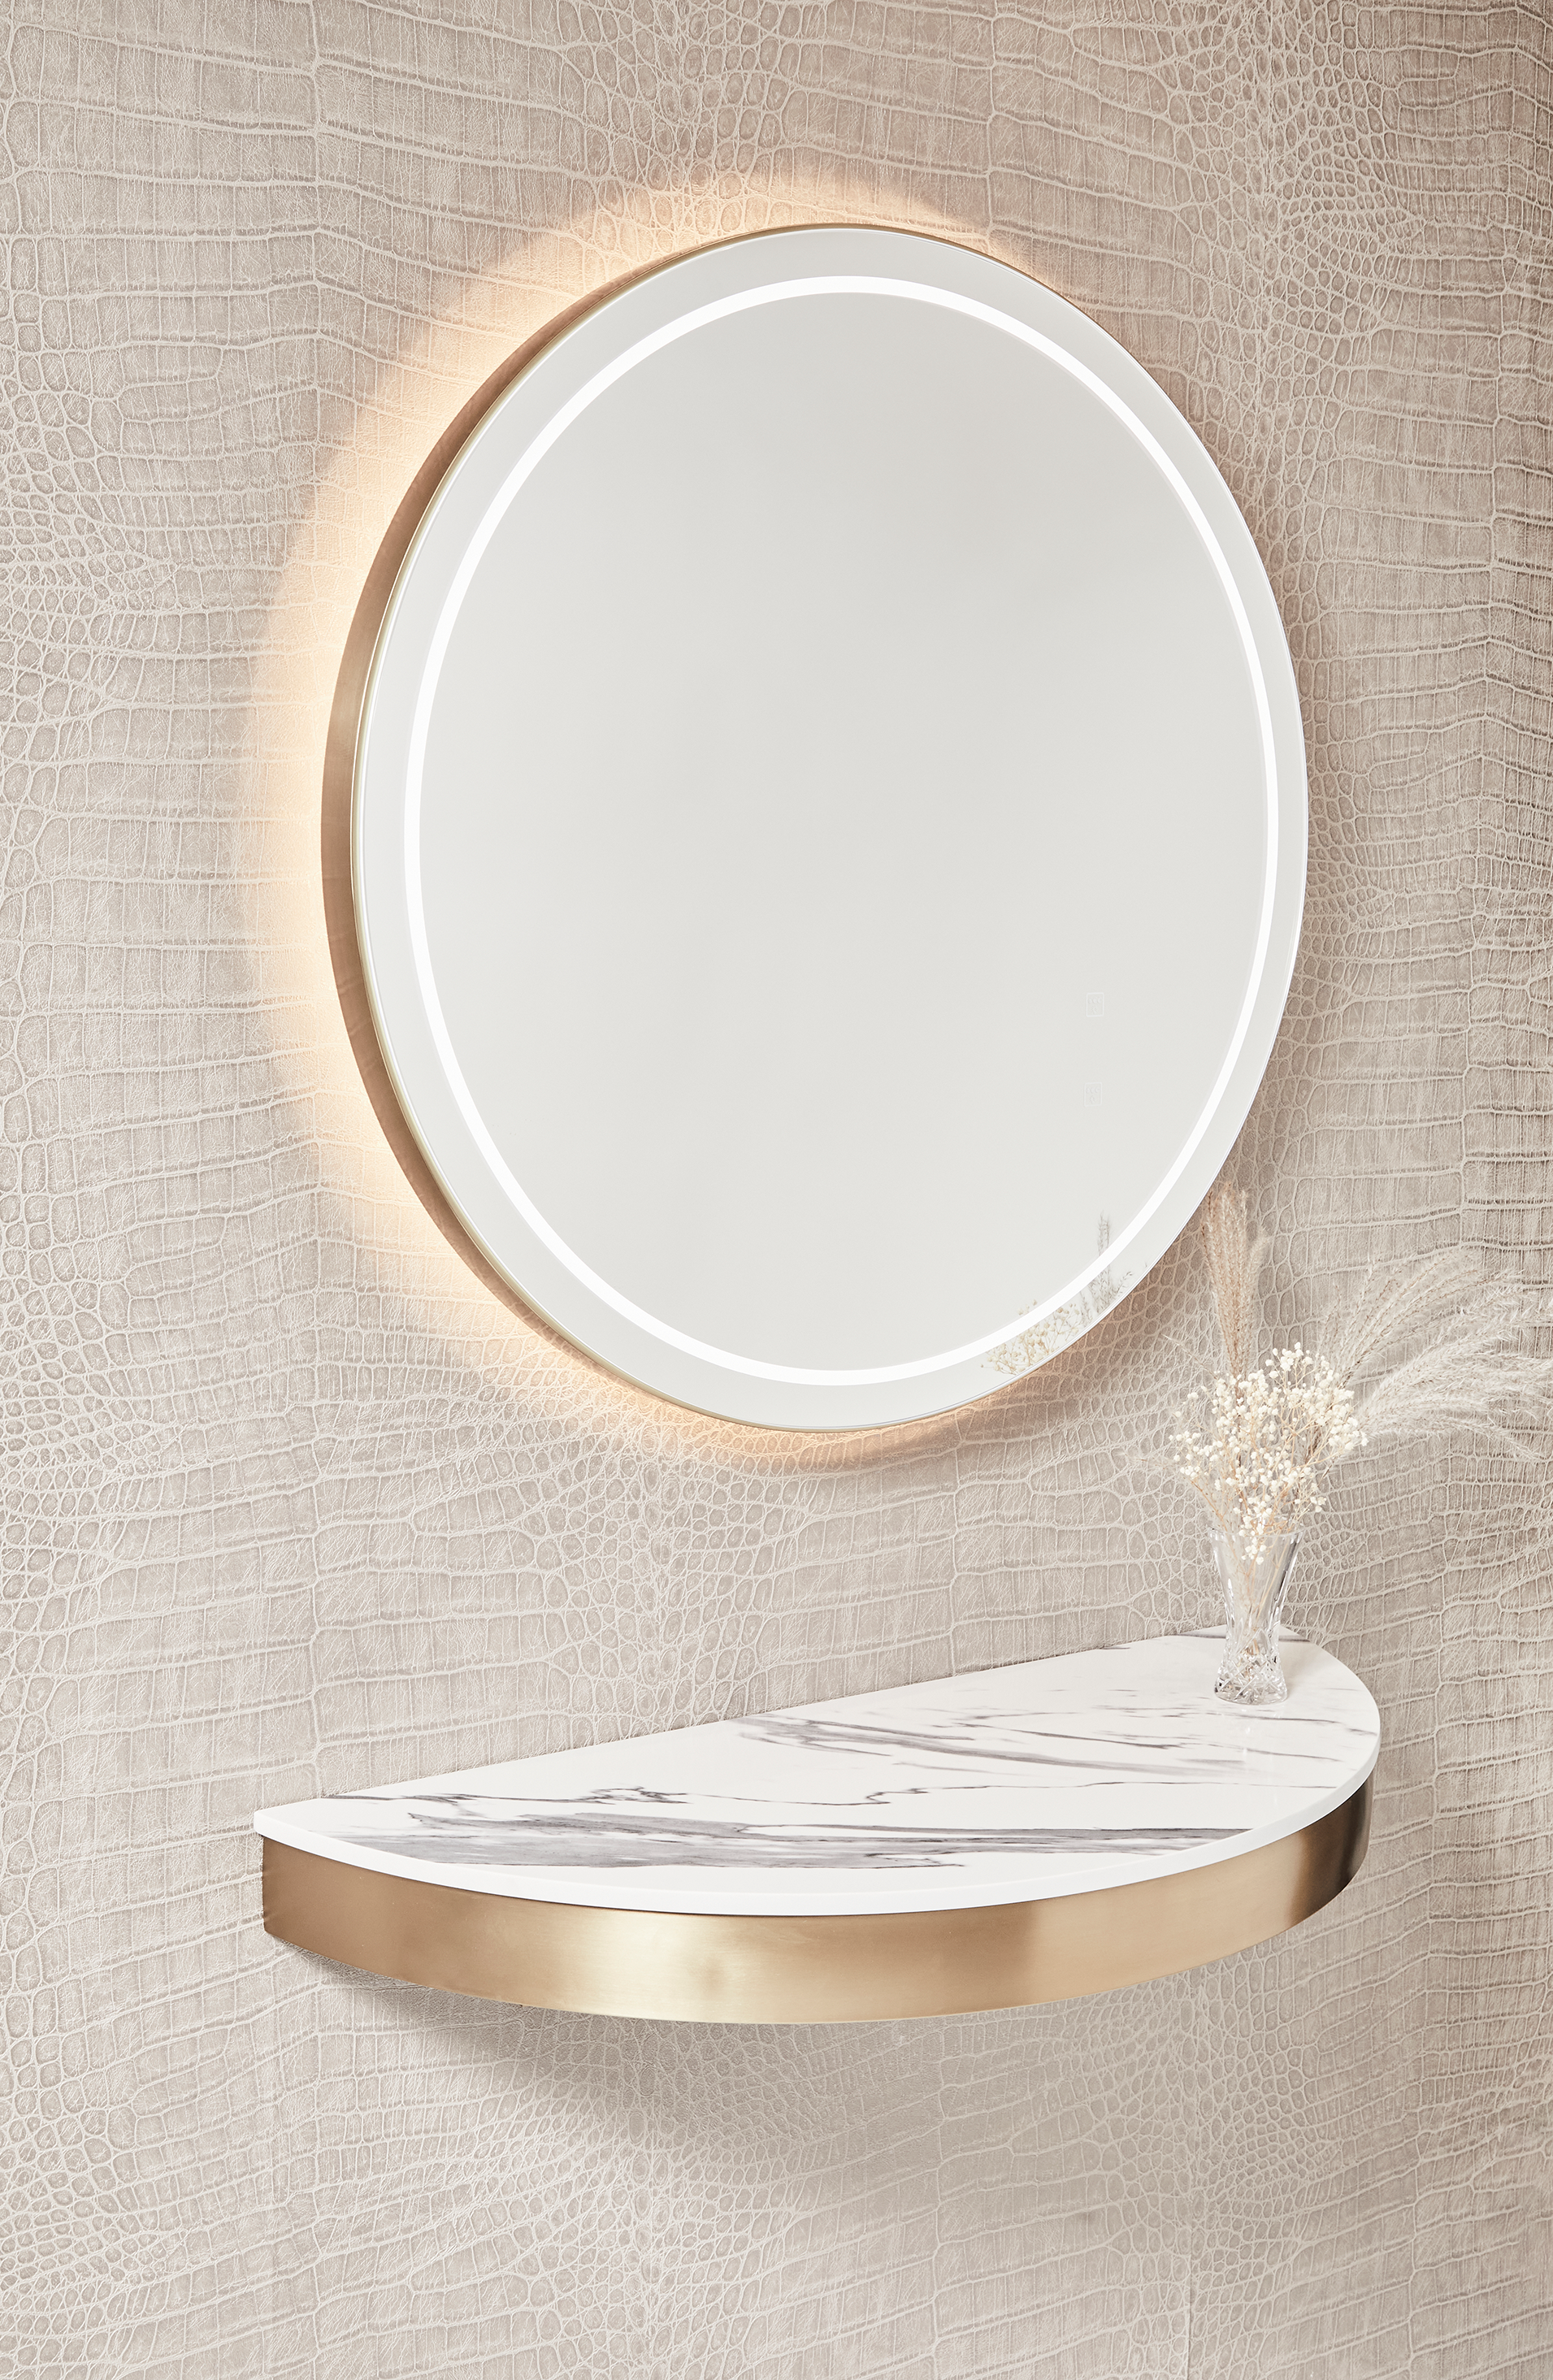 The Bali Styling Unit - Gold with White Patterned Stone Top by SEC